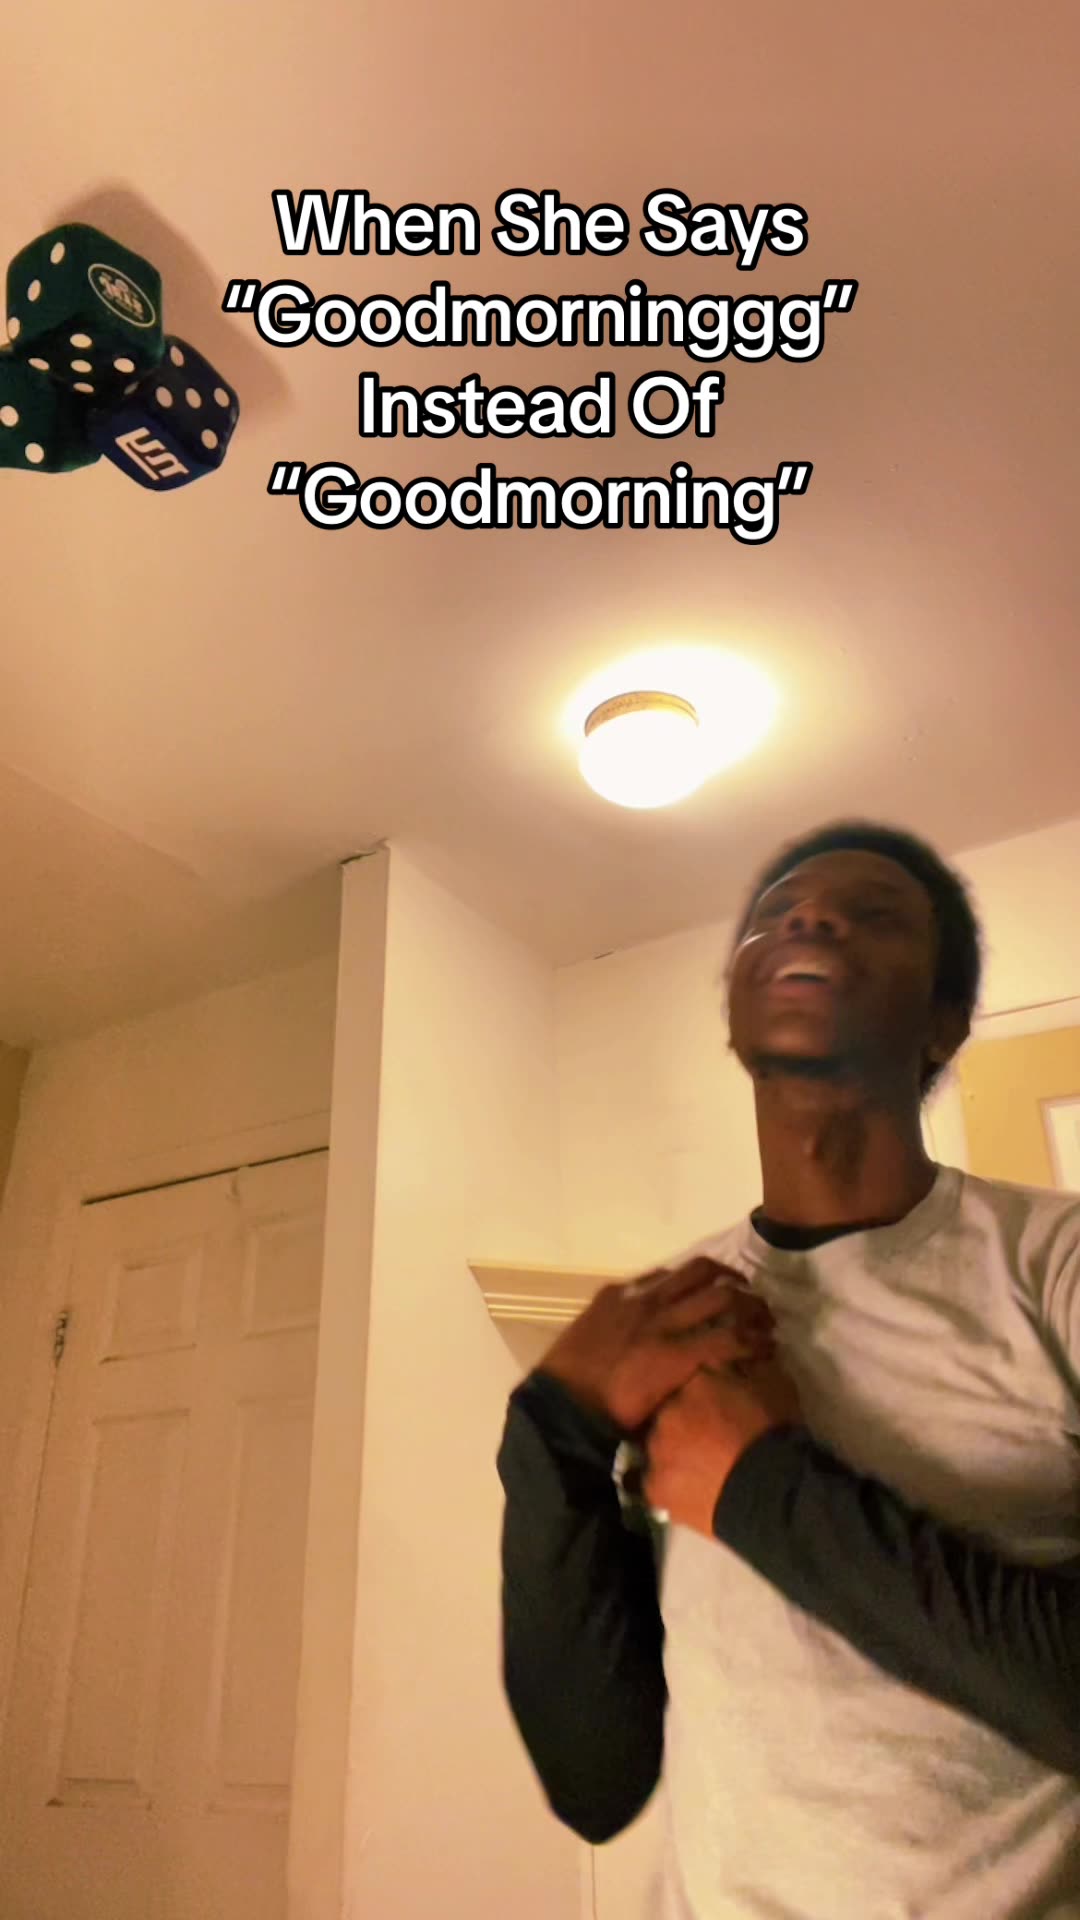 When She Says “Goodmorninggg” Instead Of “Goodmorning”